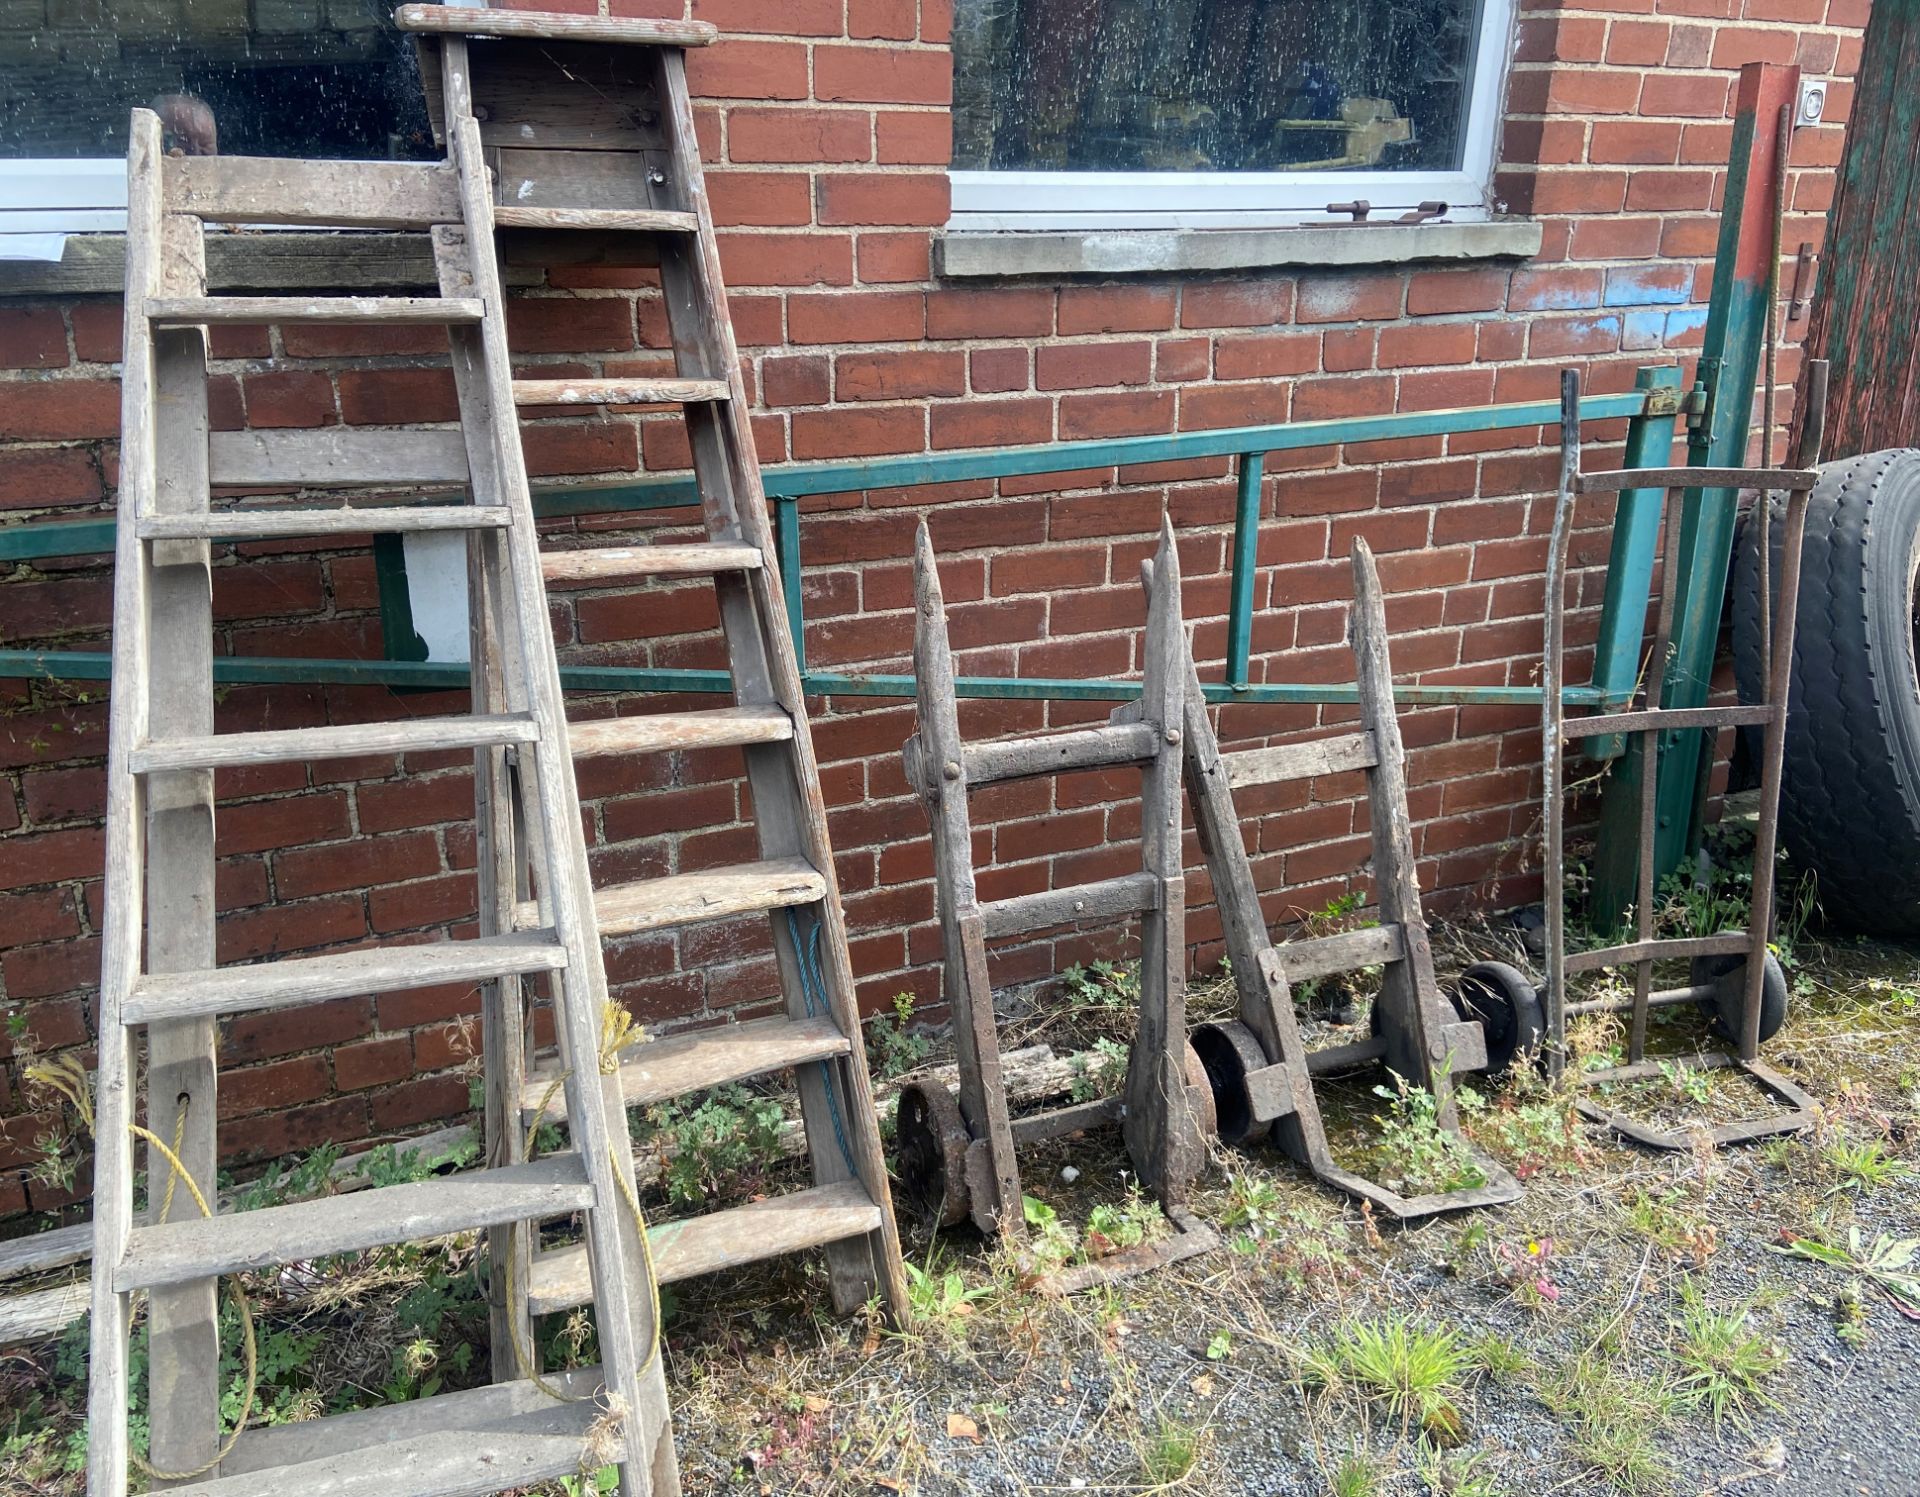 5 items - 2 x 7 tread wooden step ladders and 3 metal/wood sack carts.